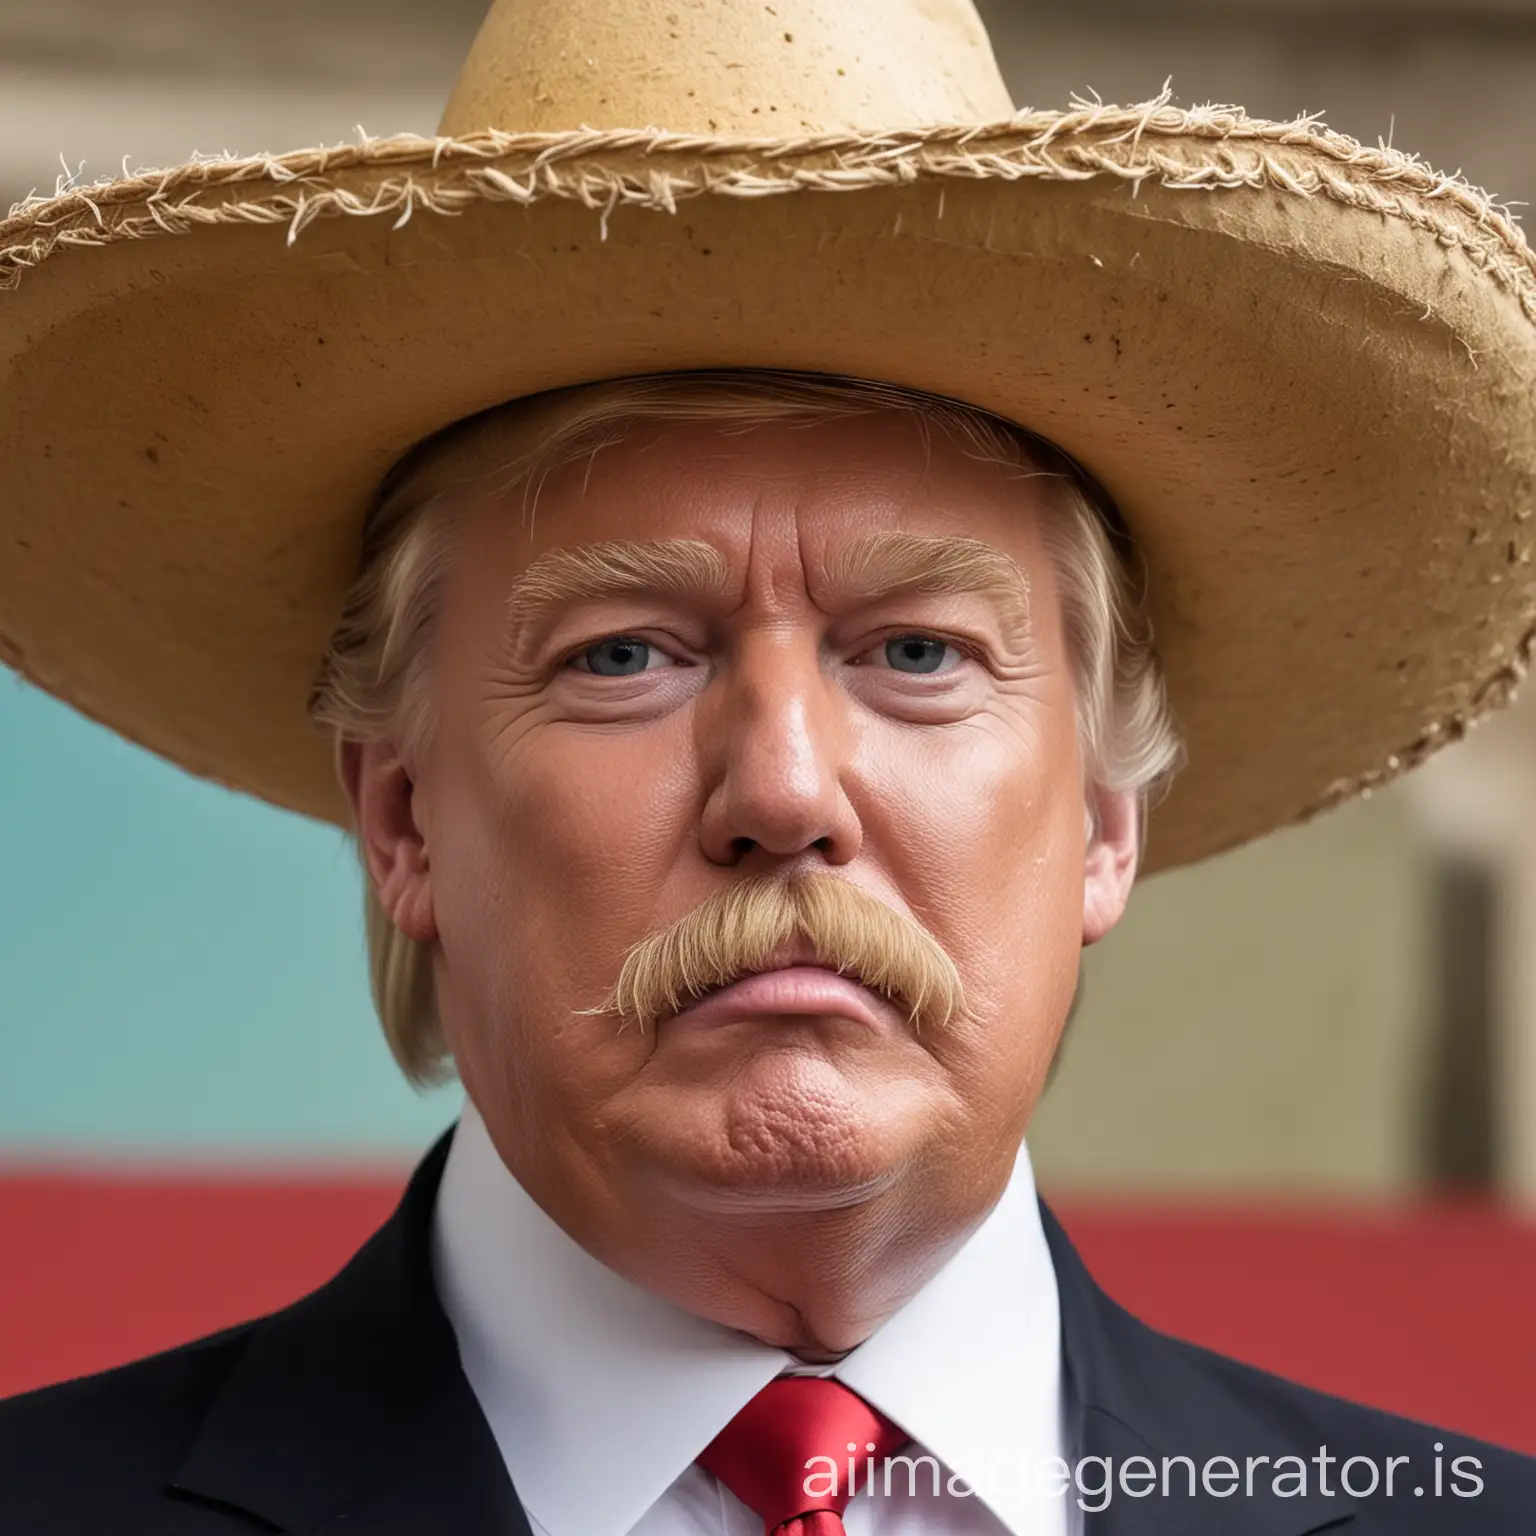 Politician-Wearing-Sombrero-and-Sporting-a-Mustache